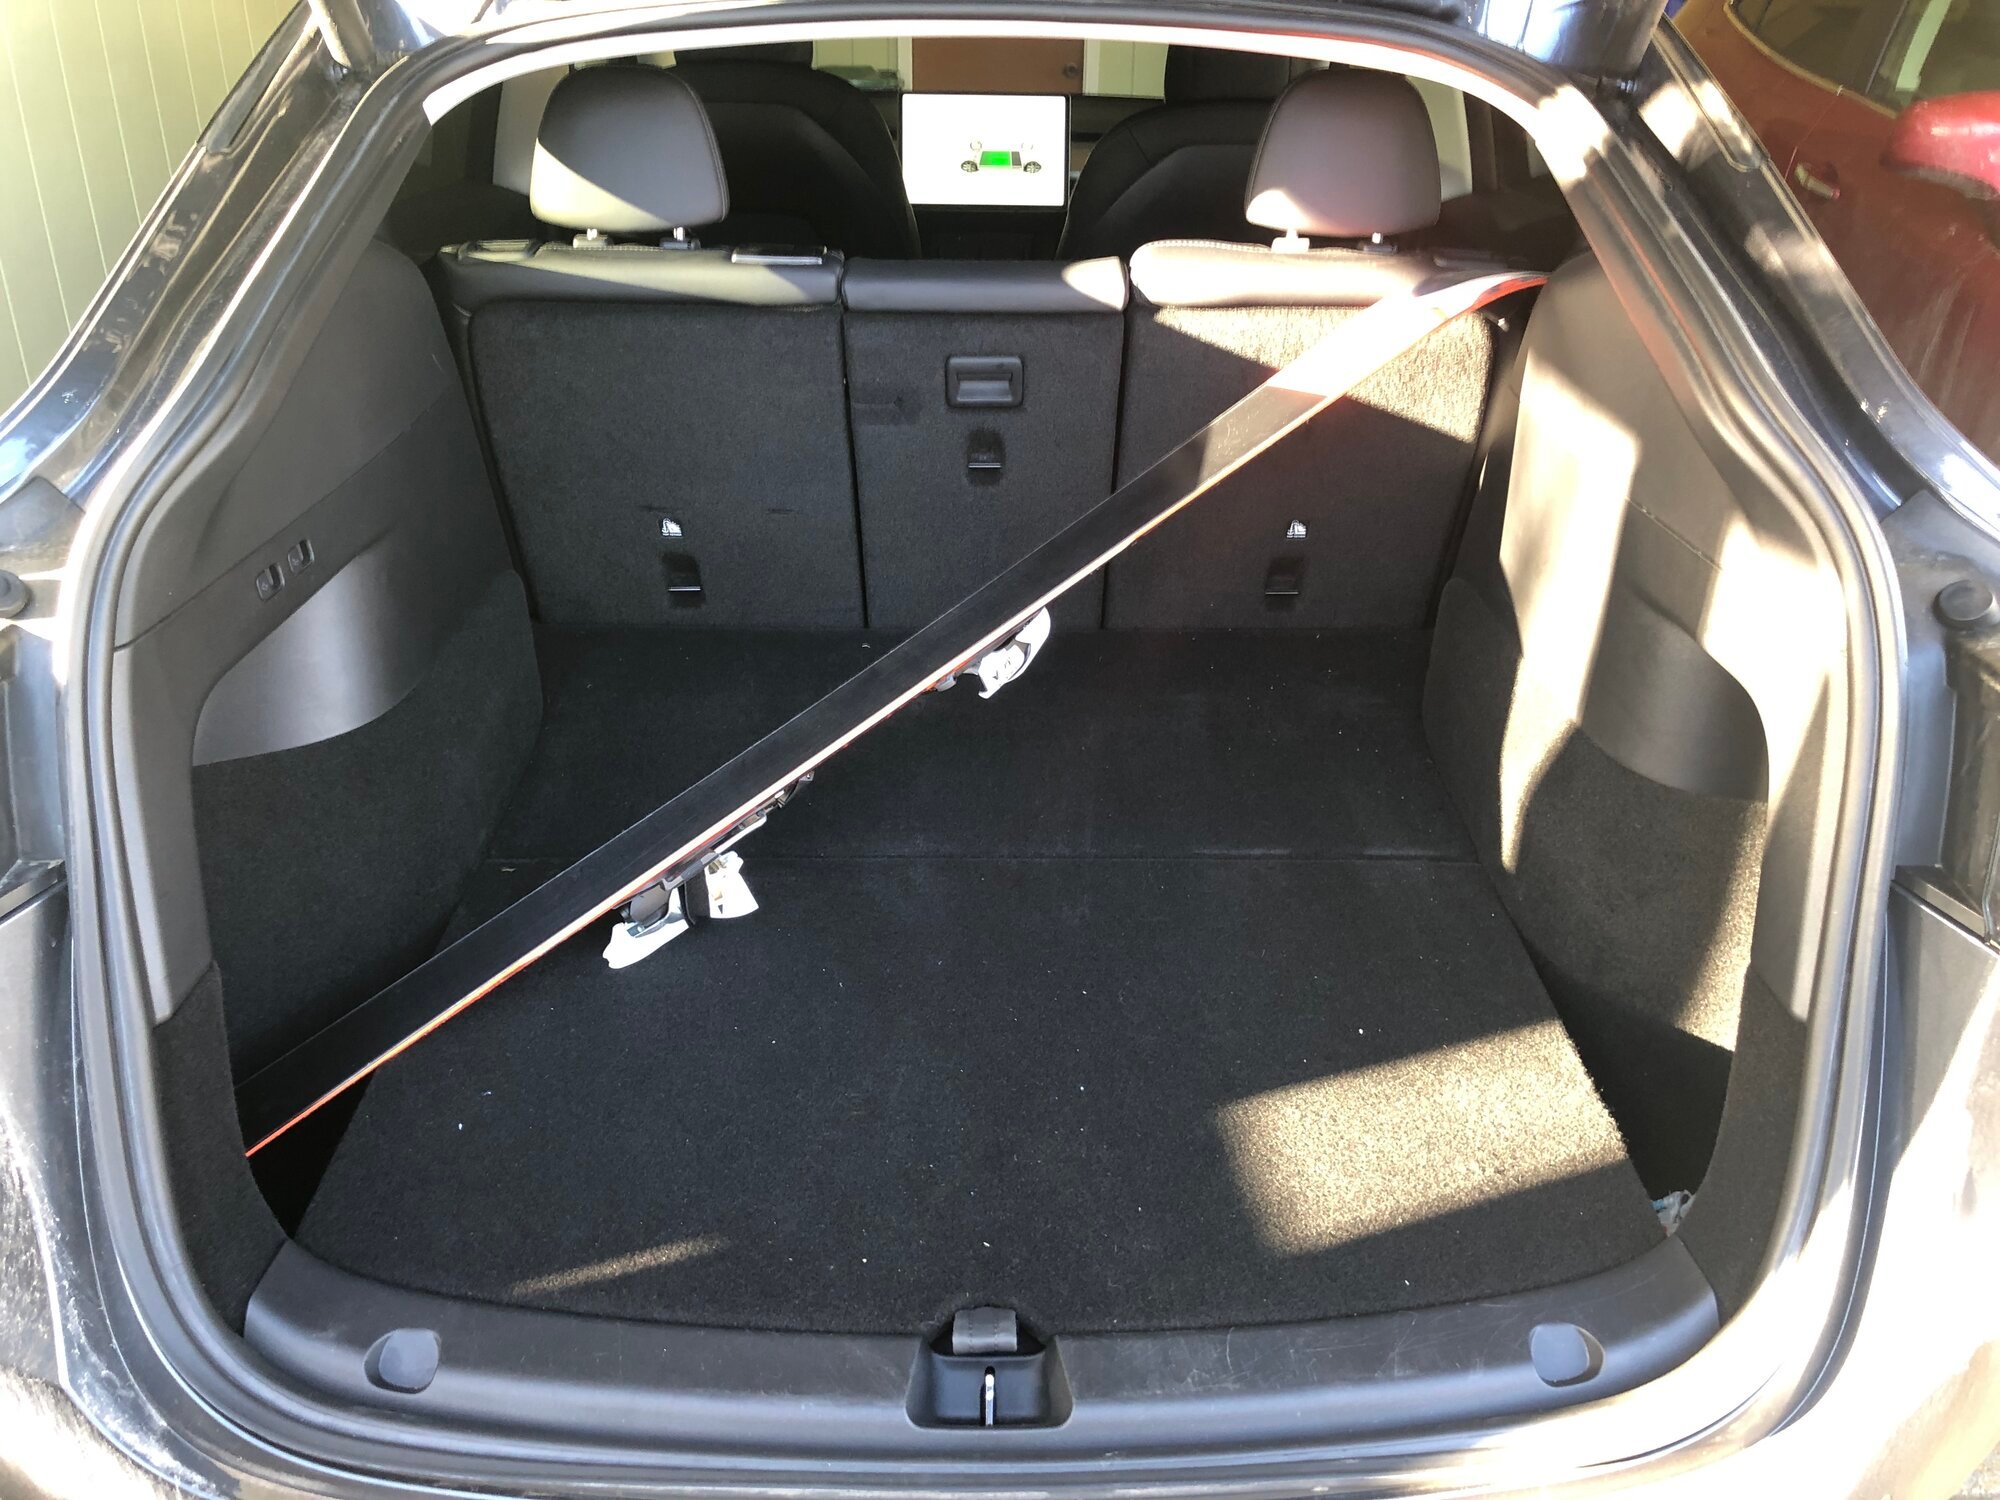 How to transport skis safely in Model Y